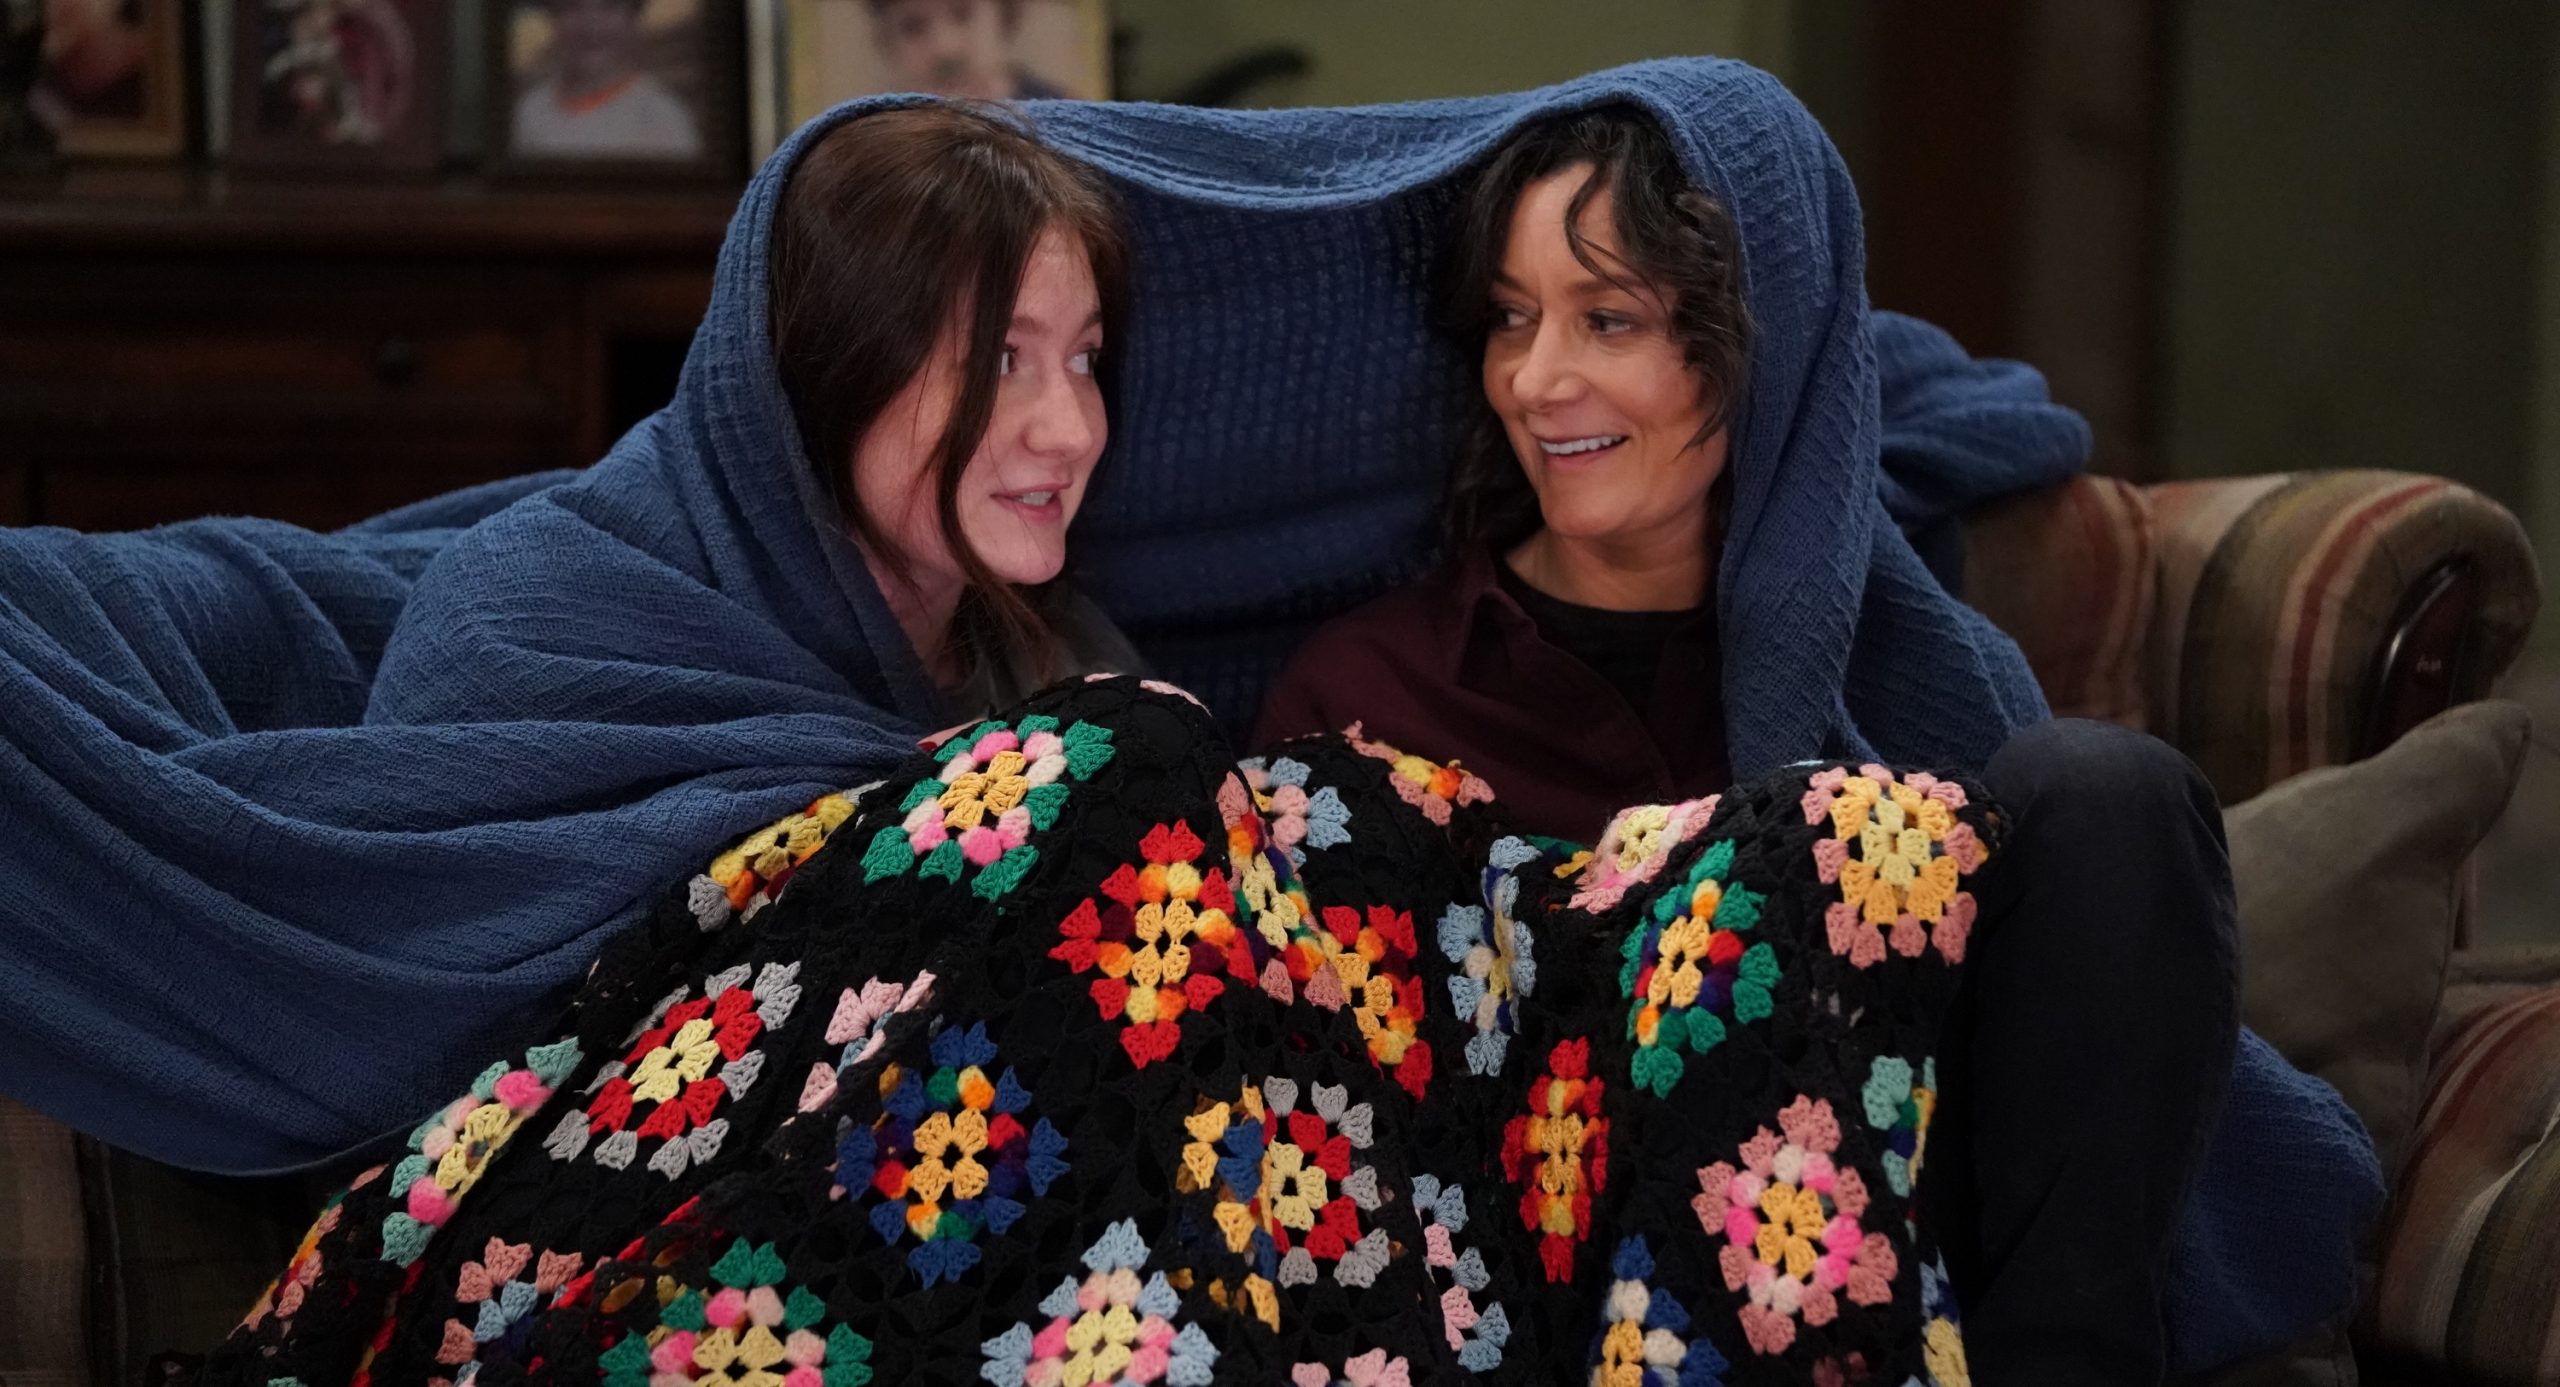 The Conners S02 E17: When and Where to Watch?